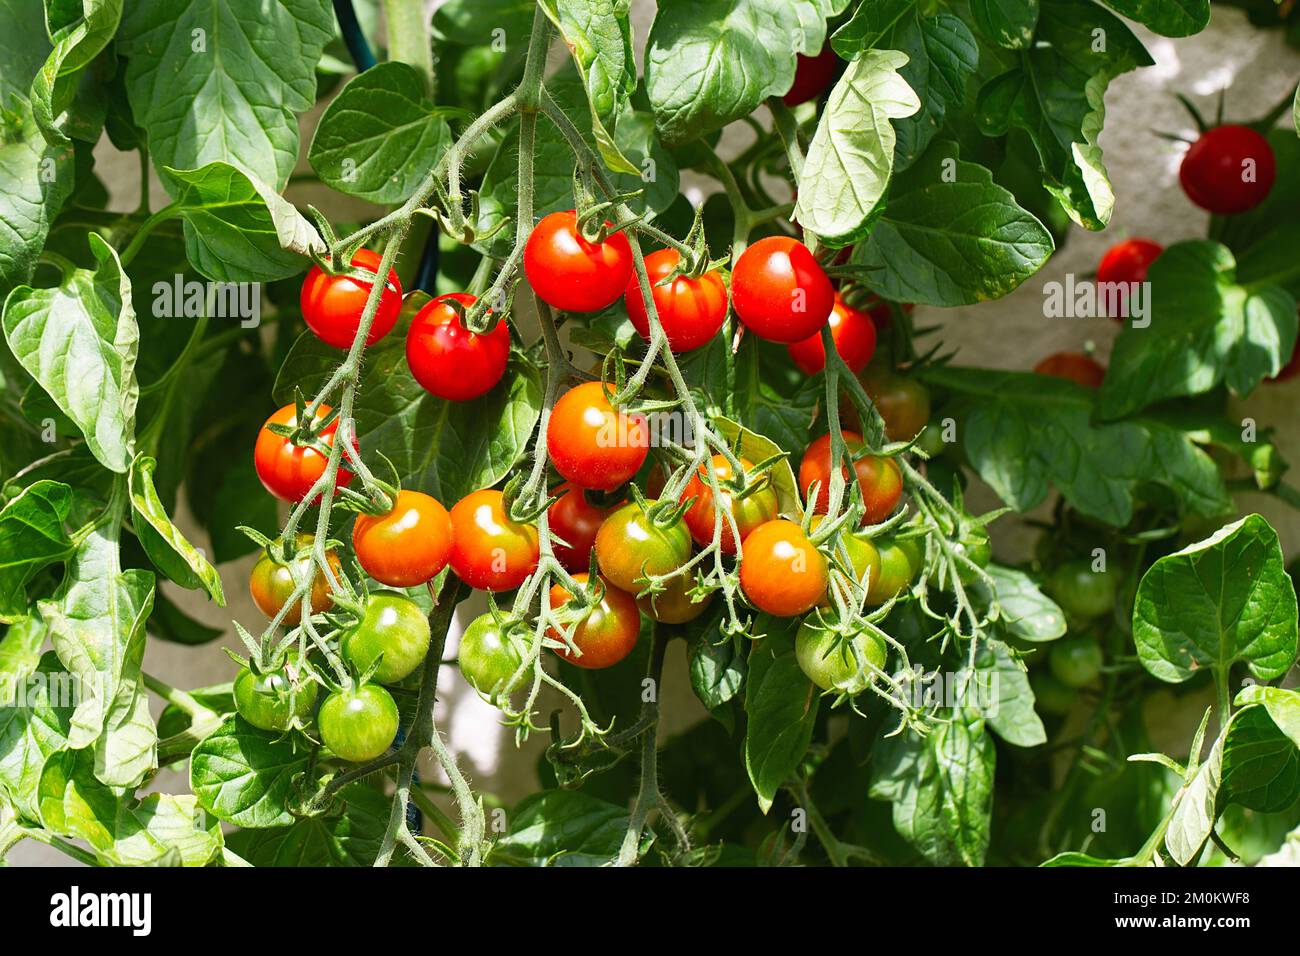 Red ripe cherry tomatoes grown in a greenhouse. Ripe tomatoes are on the green foliage background, hanging on the vine of a tomato tree in the garden. Stock Photo